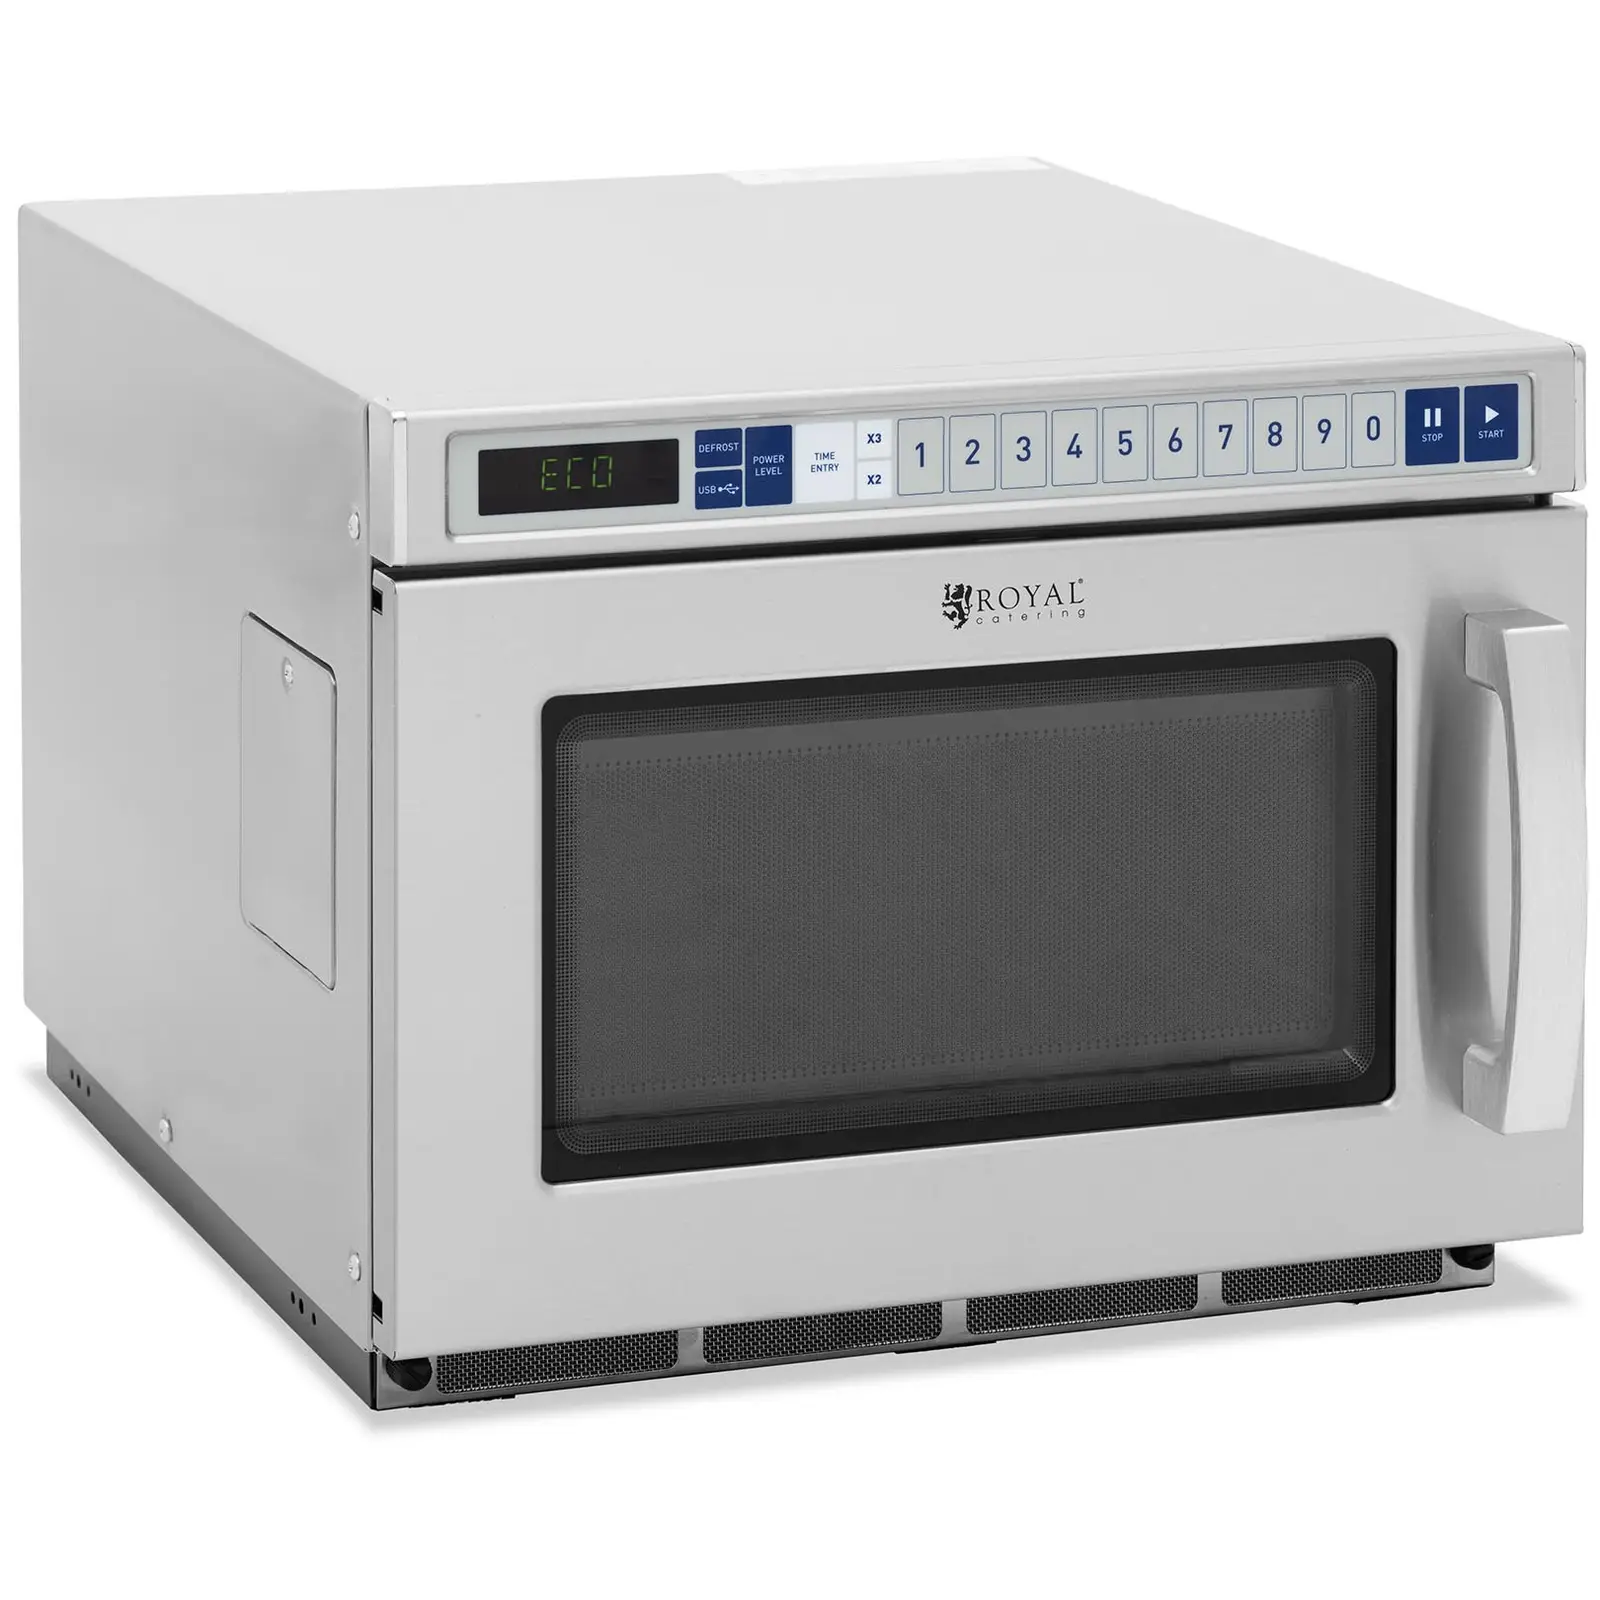 Microondas industrial - 3000 W - 17 L - Royal Catering